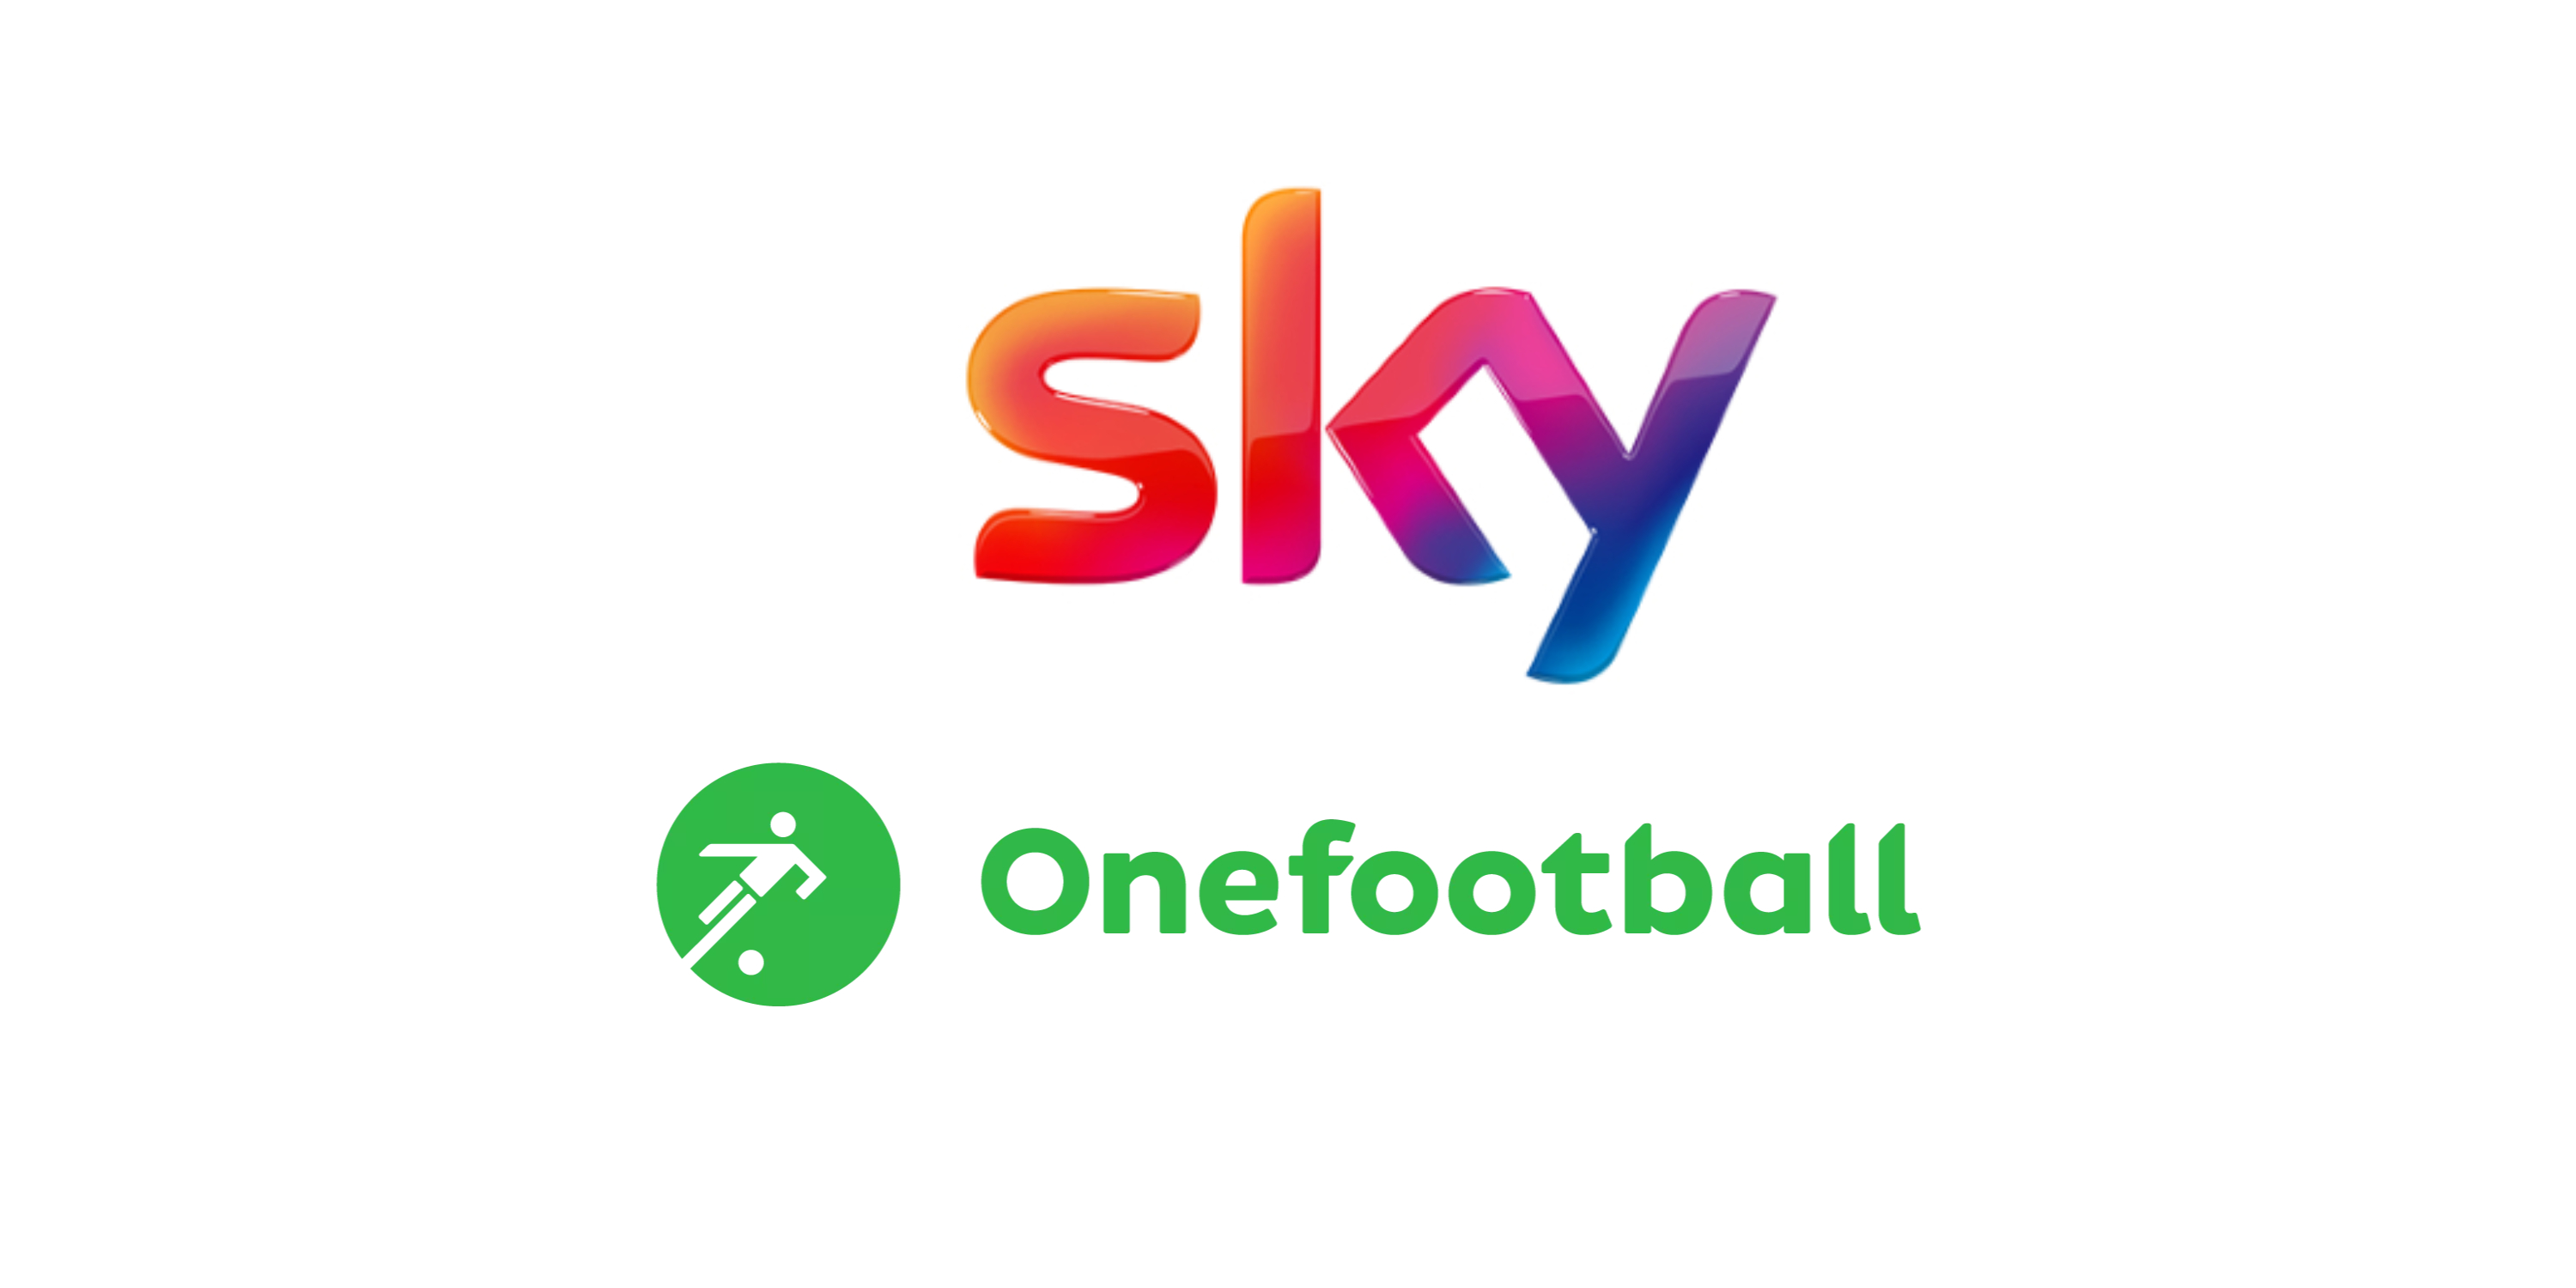 Pay-per-View Sky streamt Live-Fußball in Onefootball-App